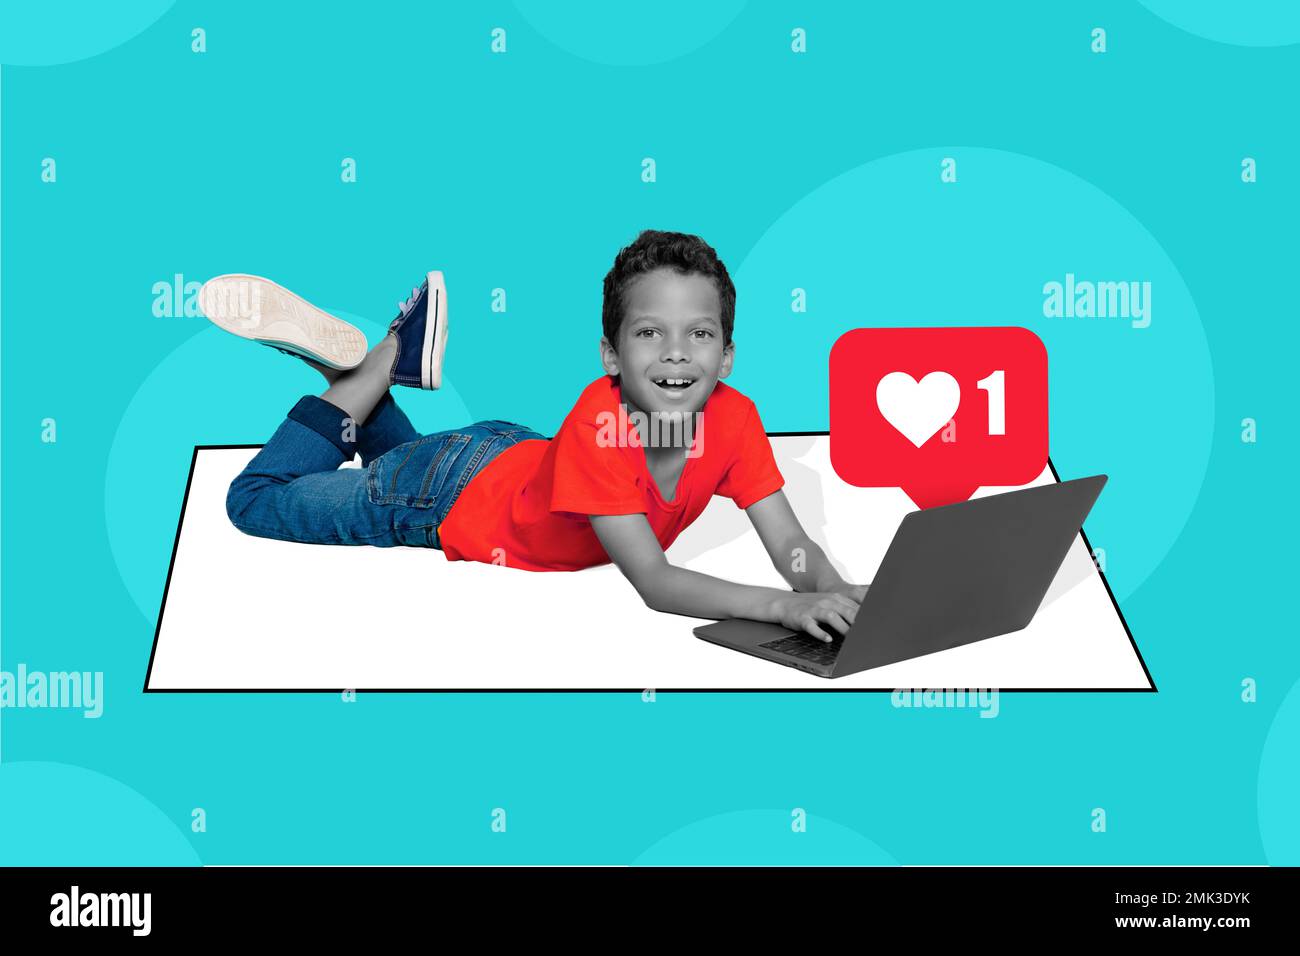 Creative template graphics collage image of little child boy chatting instagram telegram facebook isolated drawing background Stock Photo